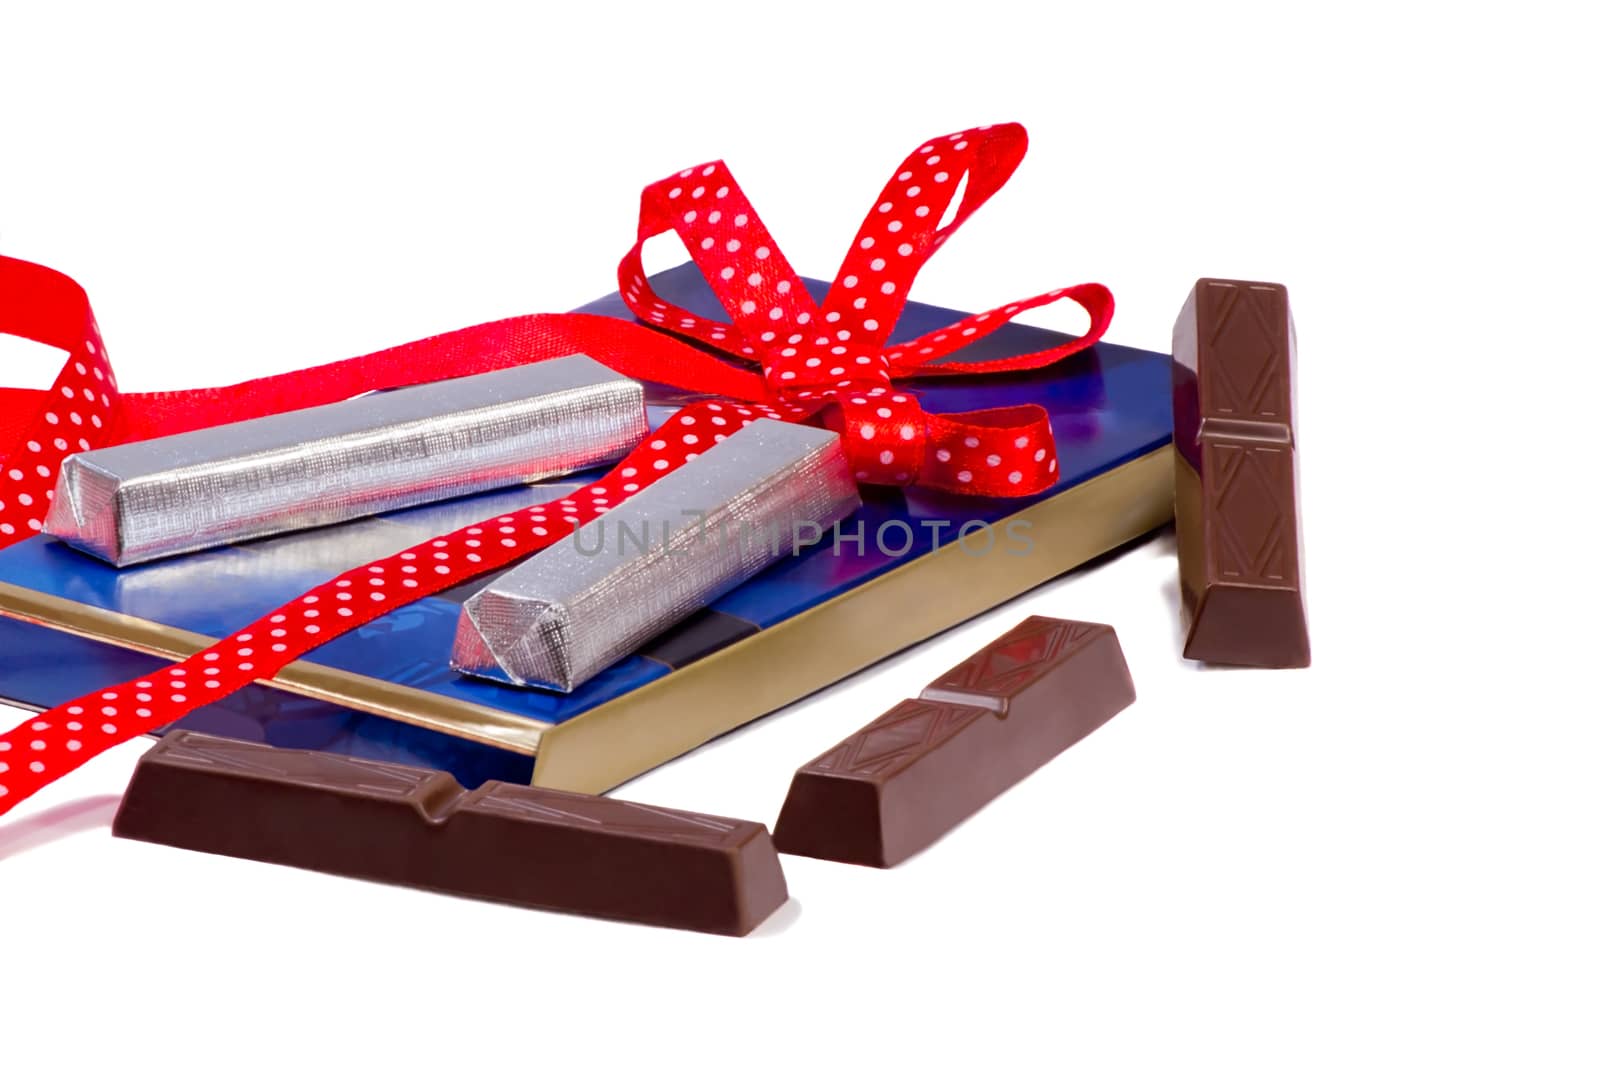 Blue box with chocolate slices wrapped in foil and decorated with a red ribbon. Presents on a white background.